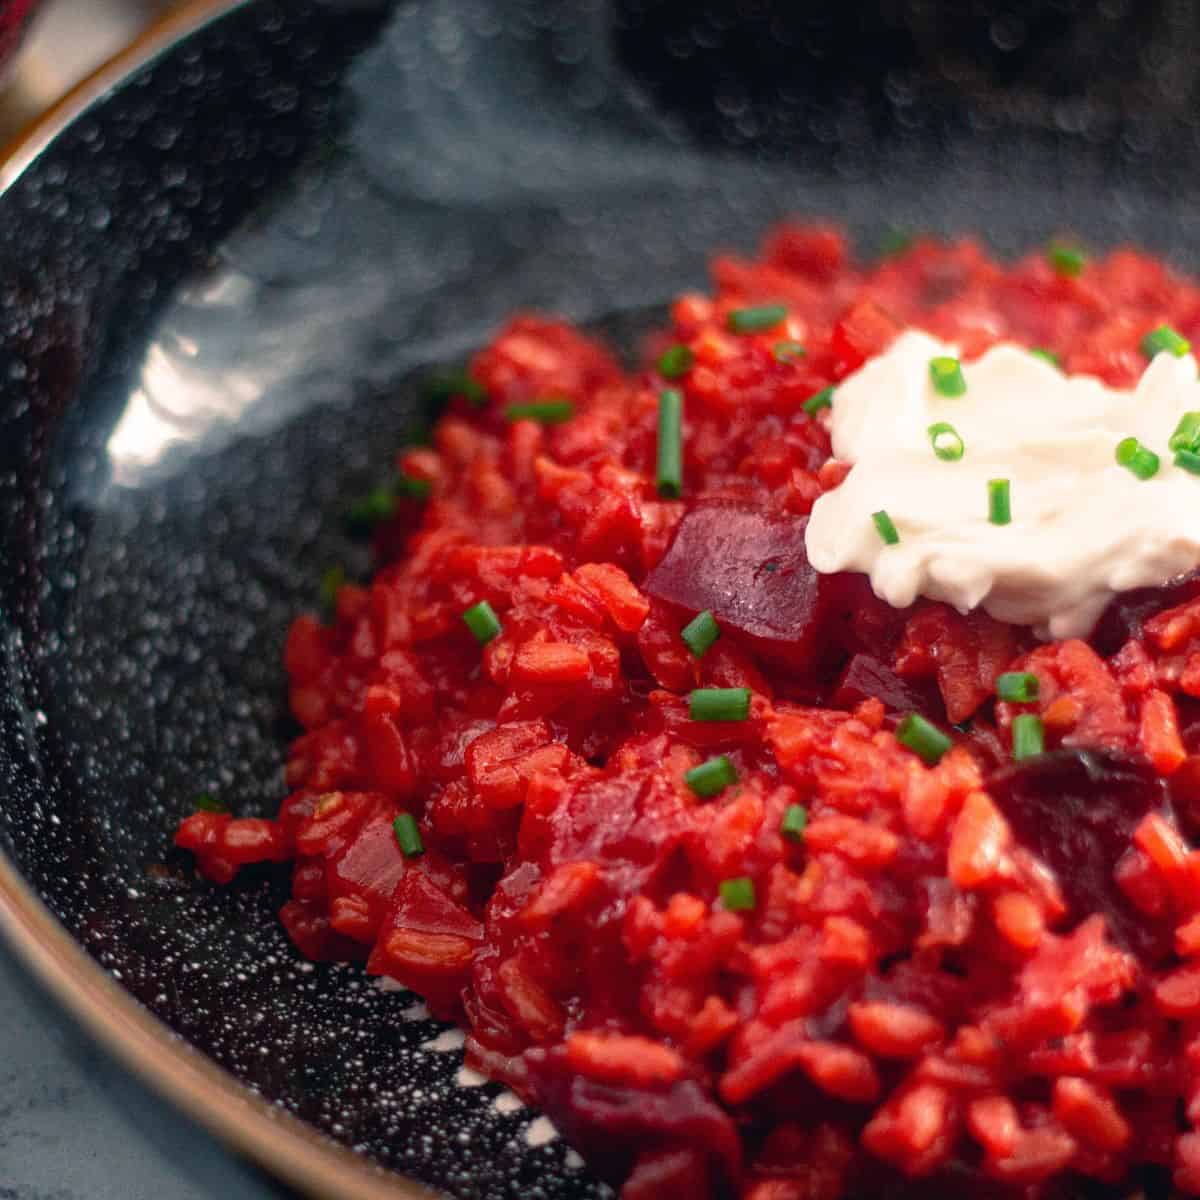 Roasted Beetroot Risotto – Delicious, Rich and Creamy